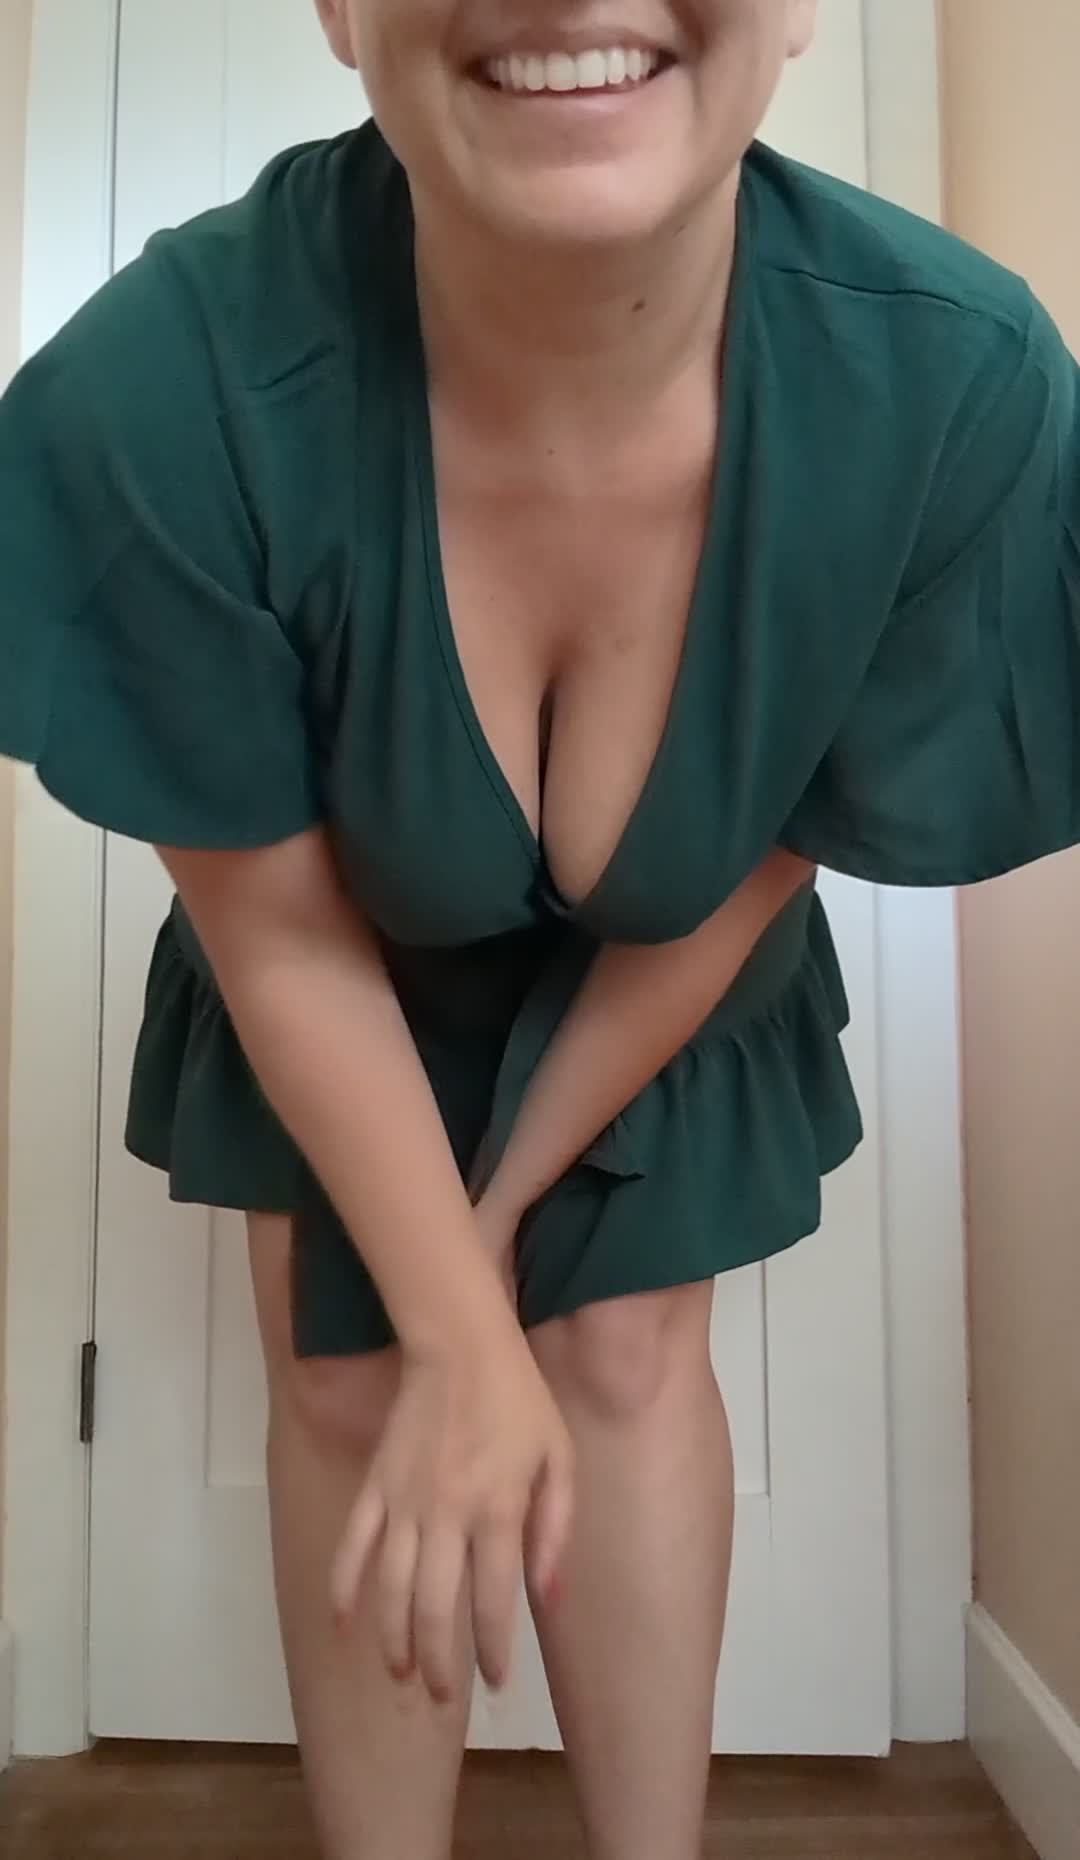 Video post by WhoreKaitlin